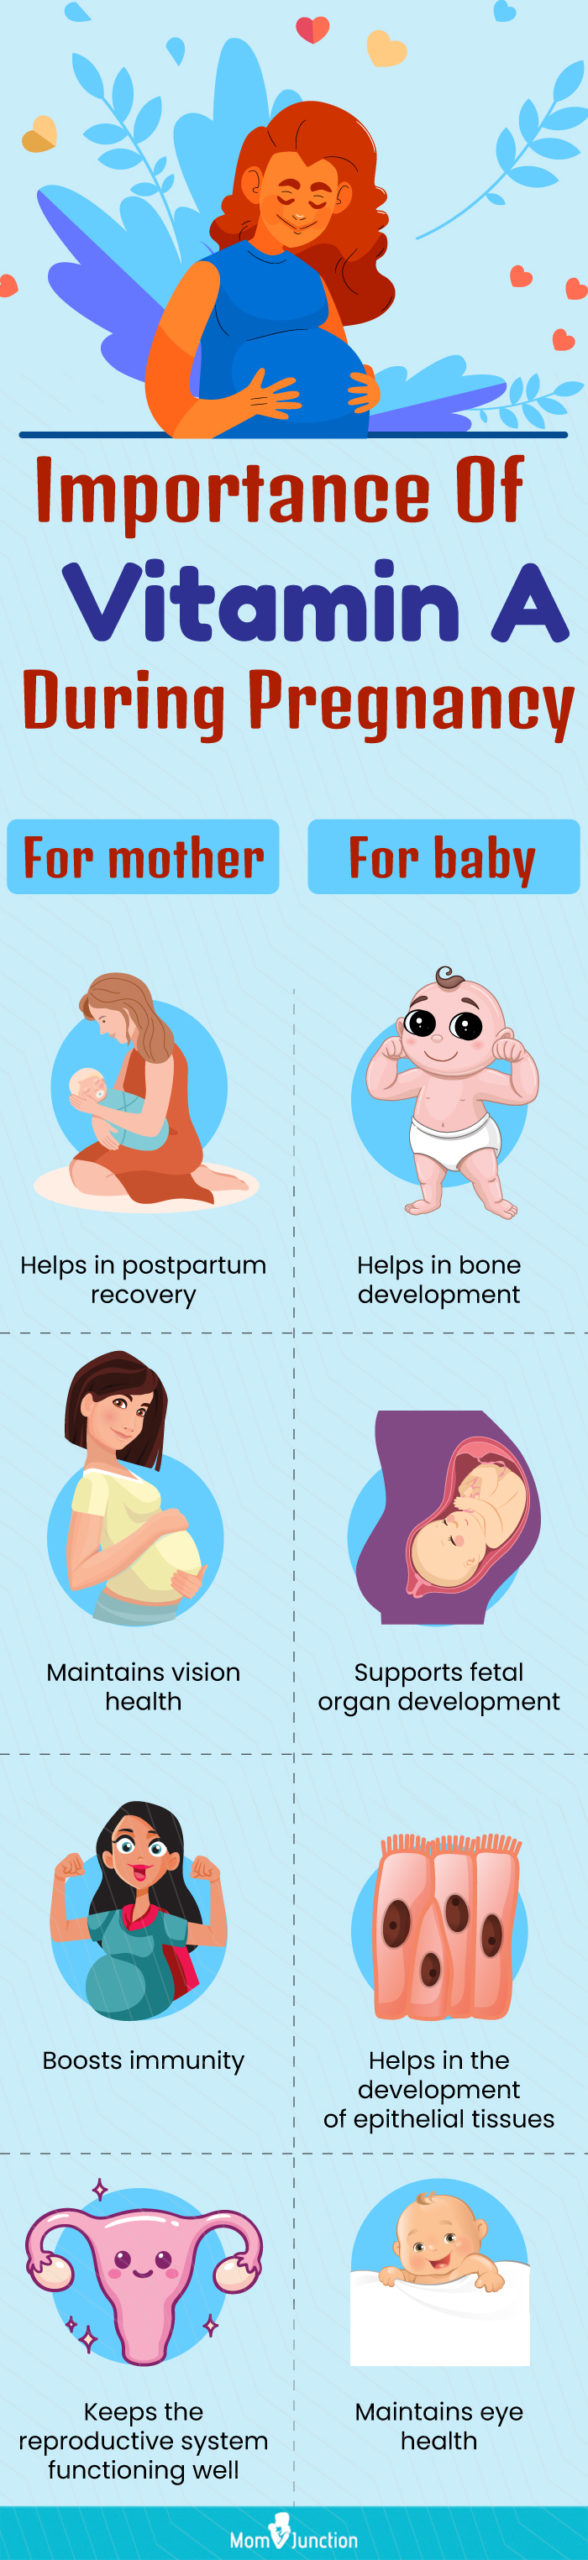 importance of vitamin a during pregnancy (infographic)